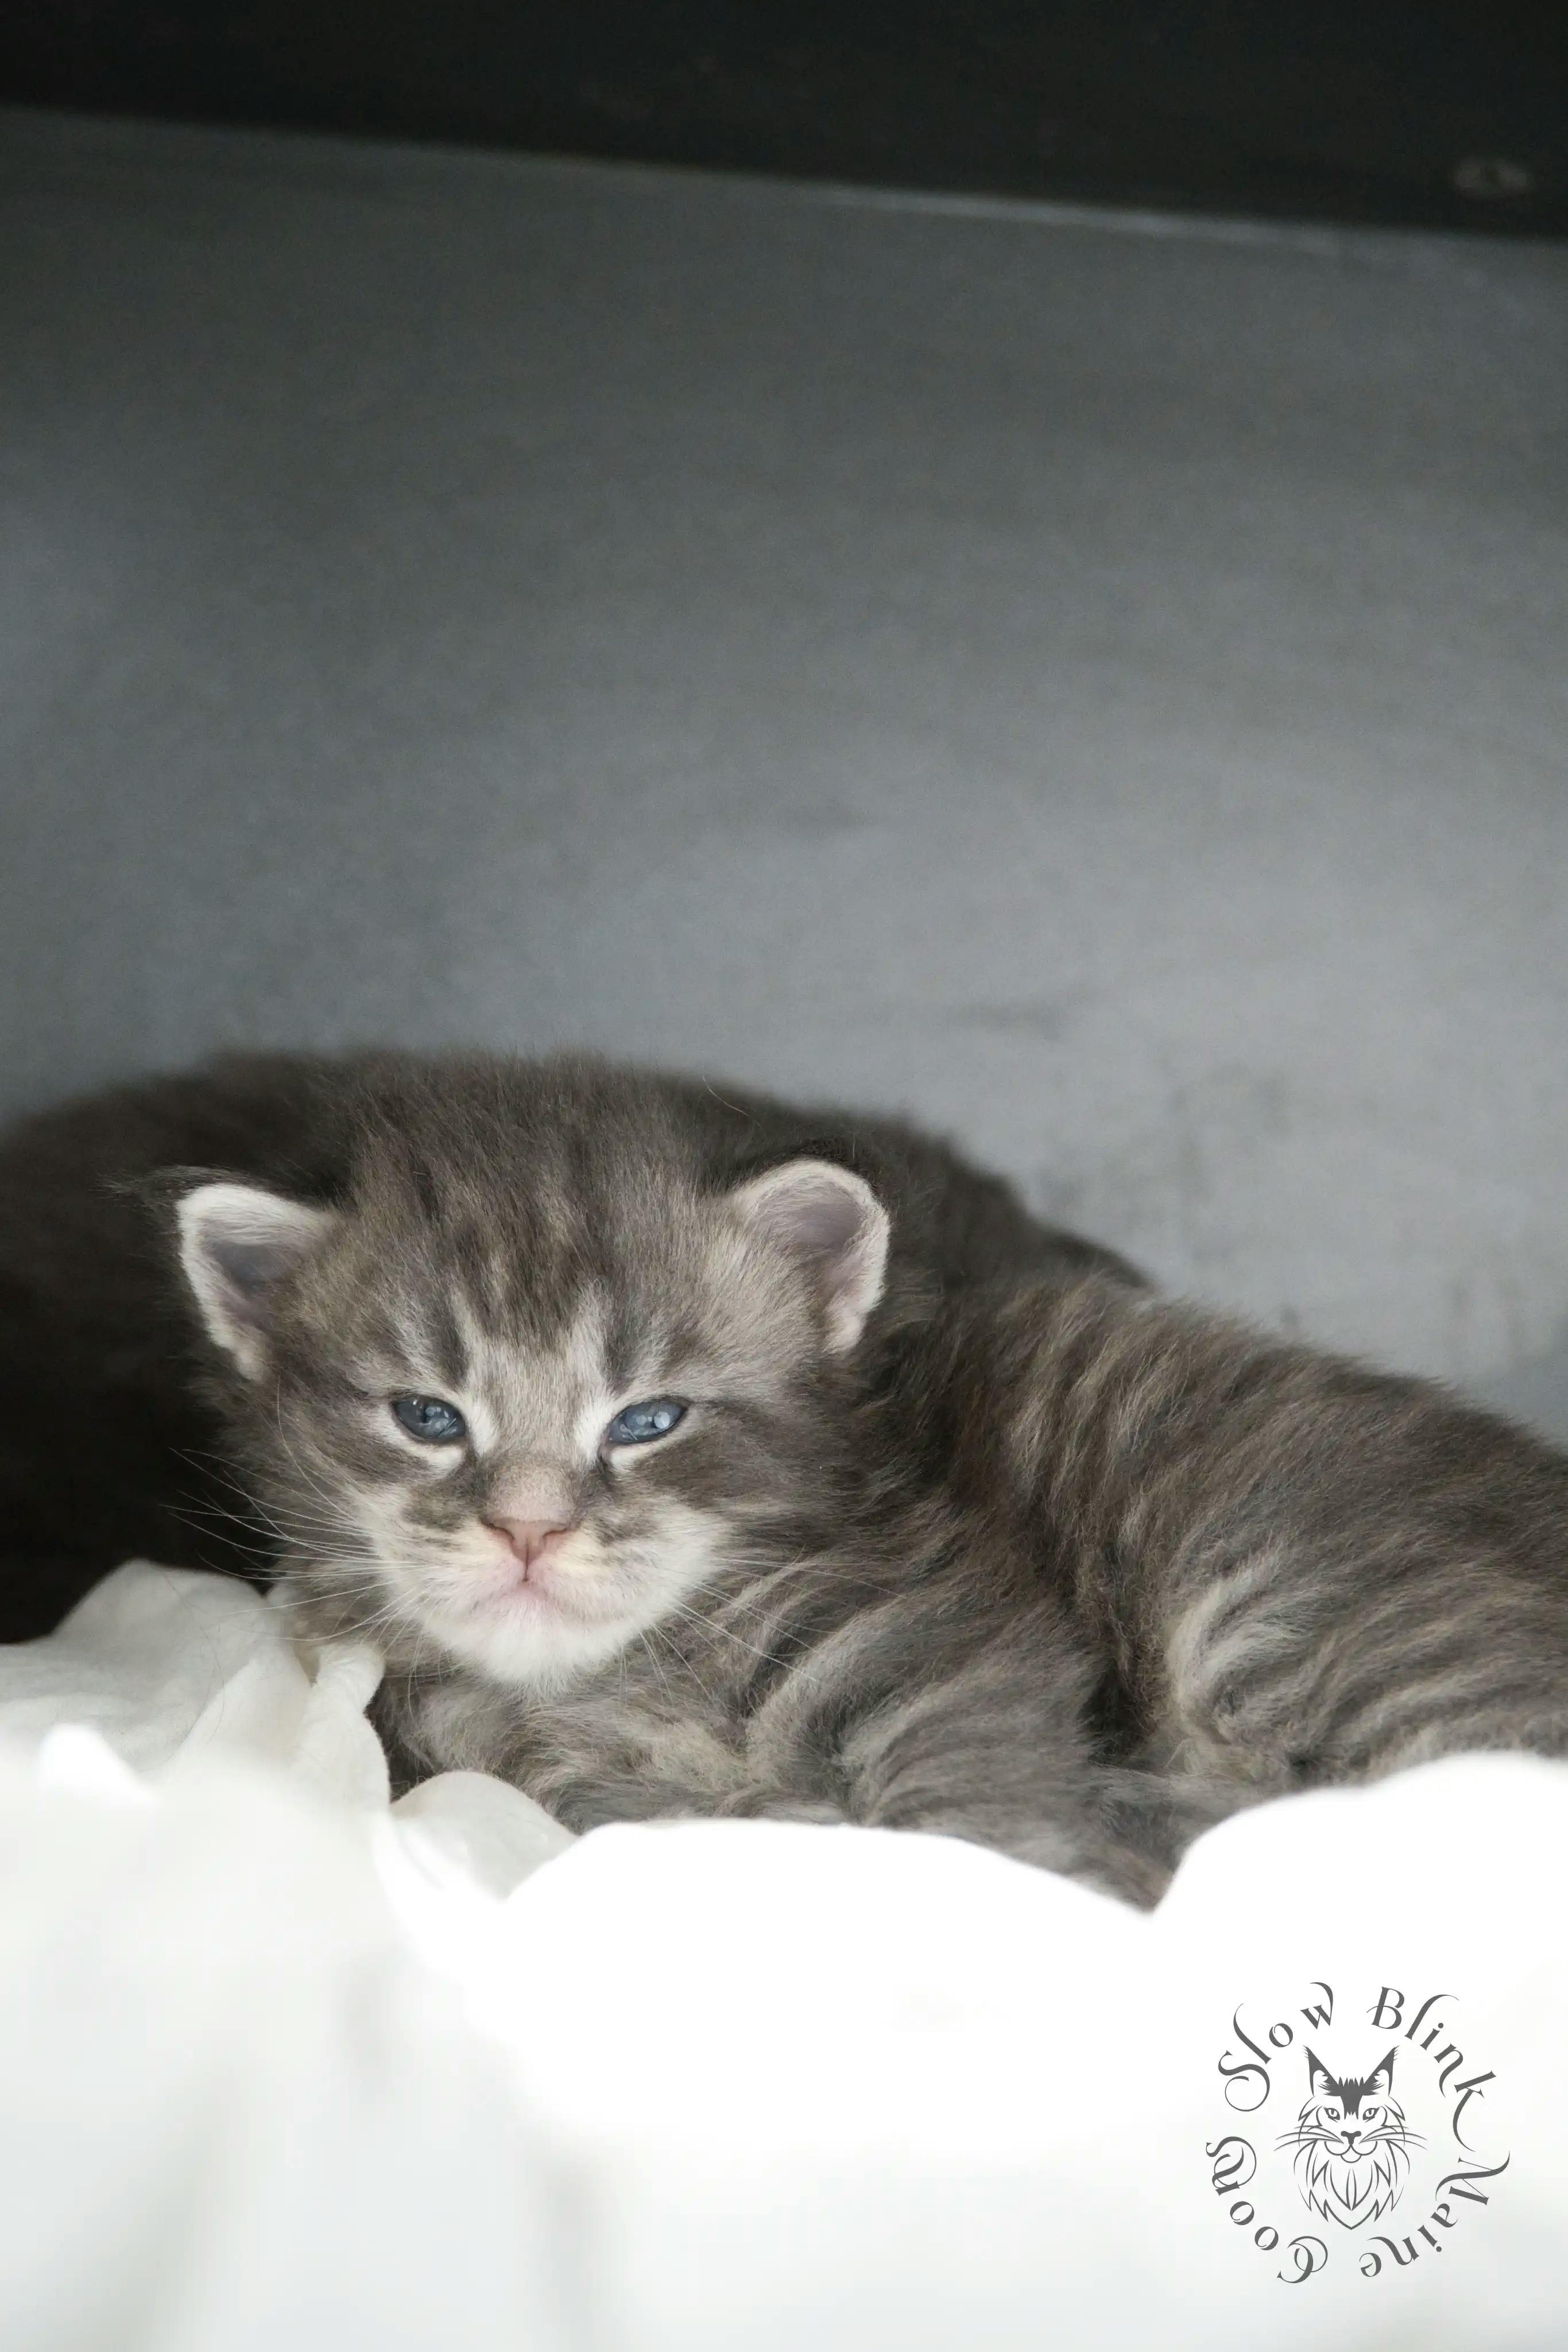 Blue Silver Tabby Maine Coon Kittens > blue silver tabby maine coon kitten | slowblinkmainecoons | 789